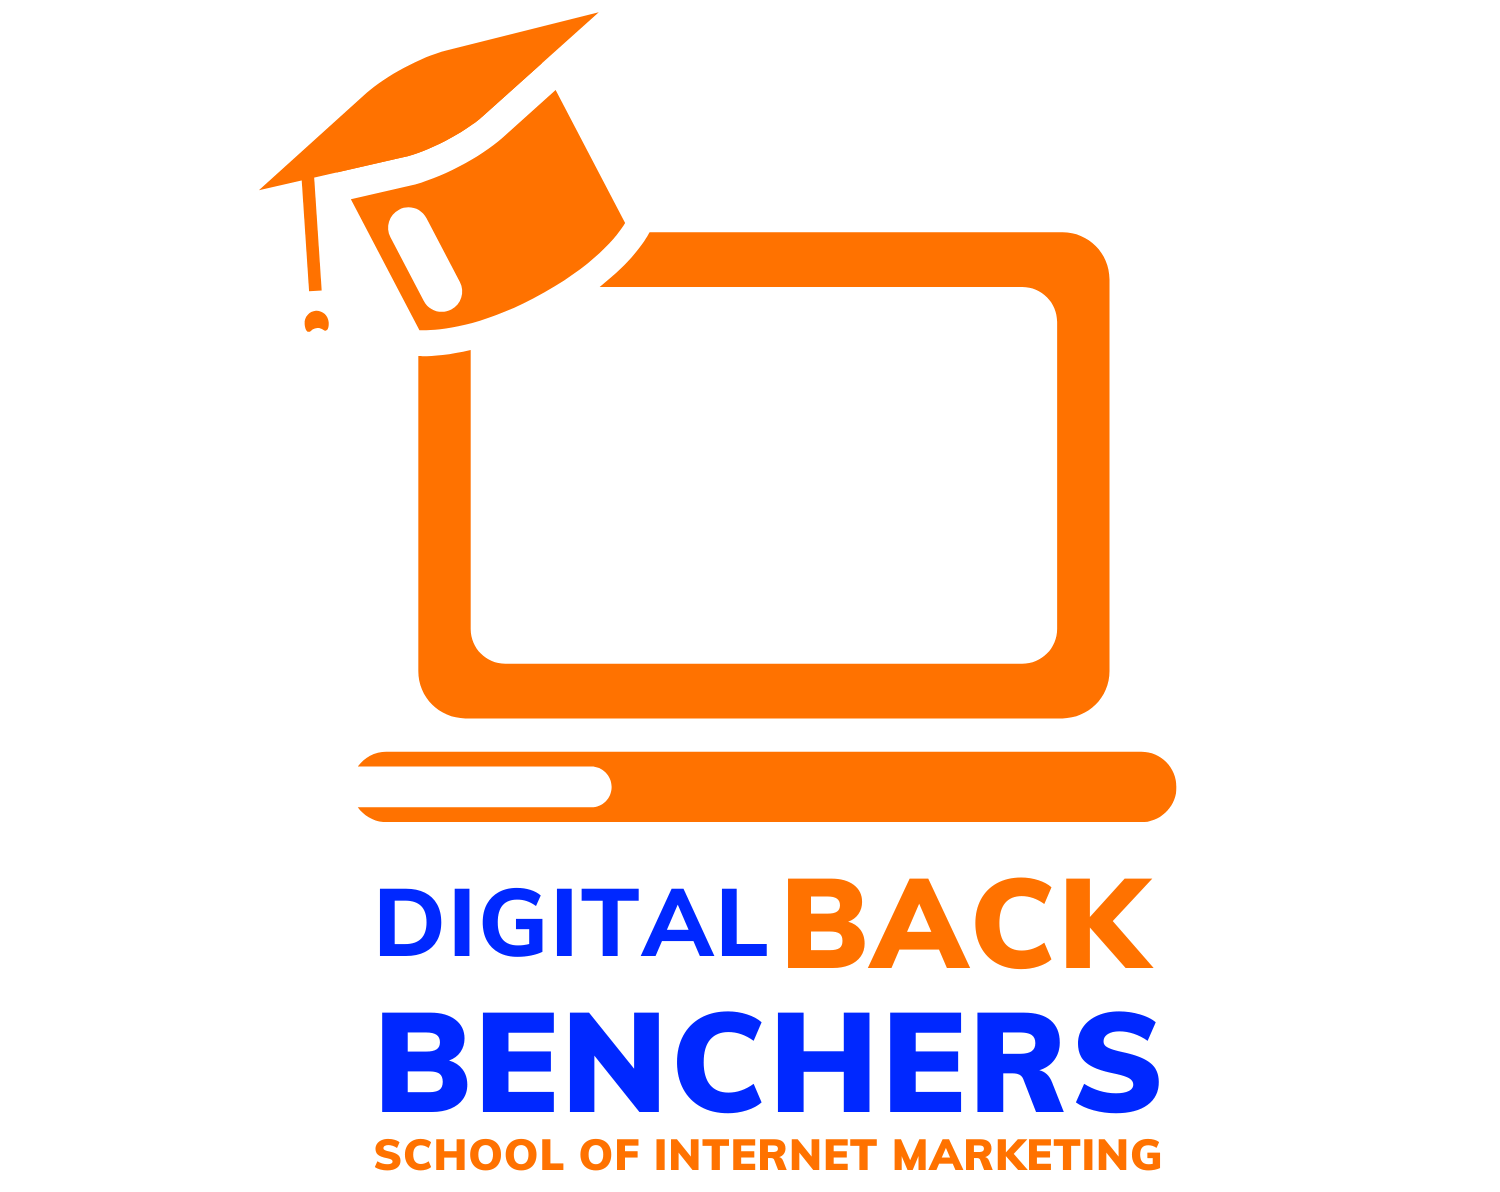 On The Bench - Hosted by Will Dean